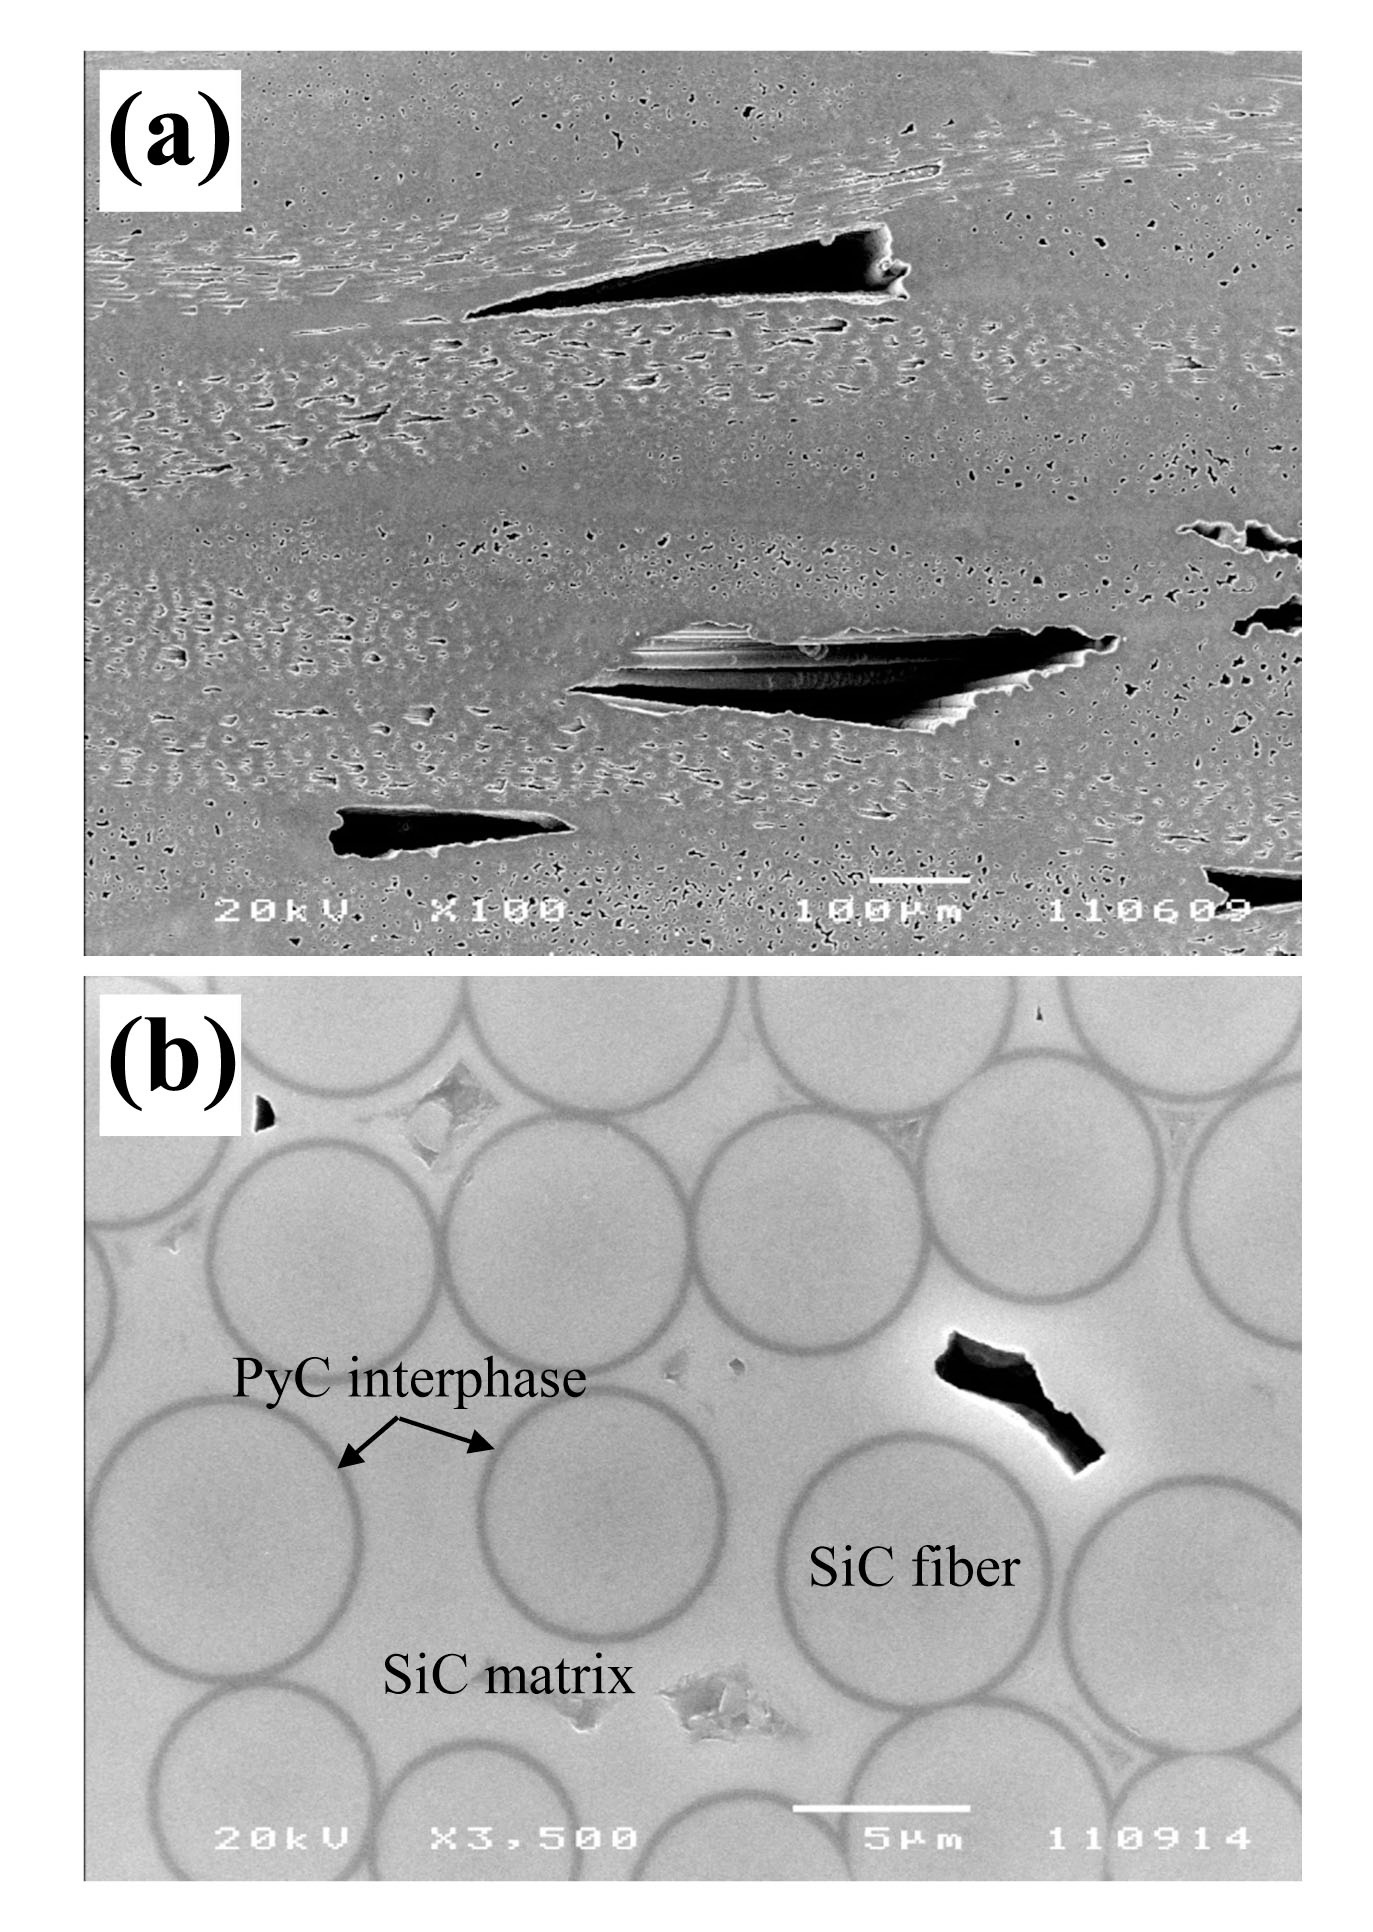 Typical Microstructures of the SiCf/SiC Composite Fabricated by the CVI Process. (b) is an Enlarged Image of (a).